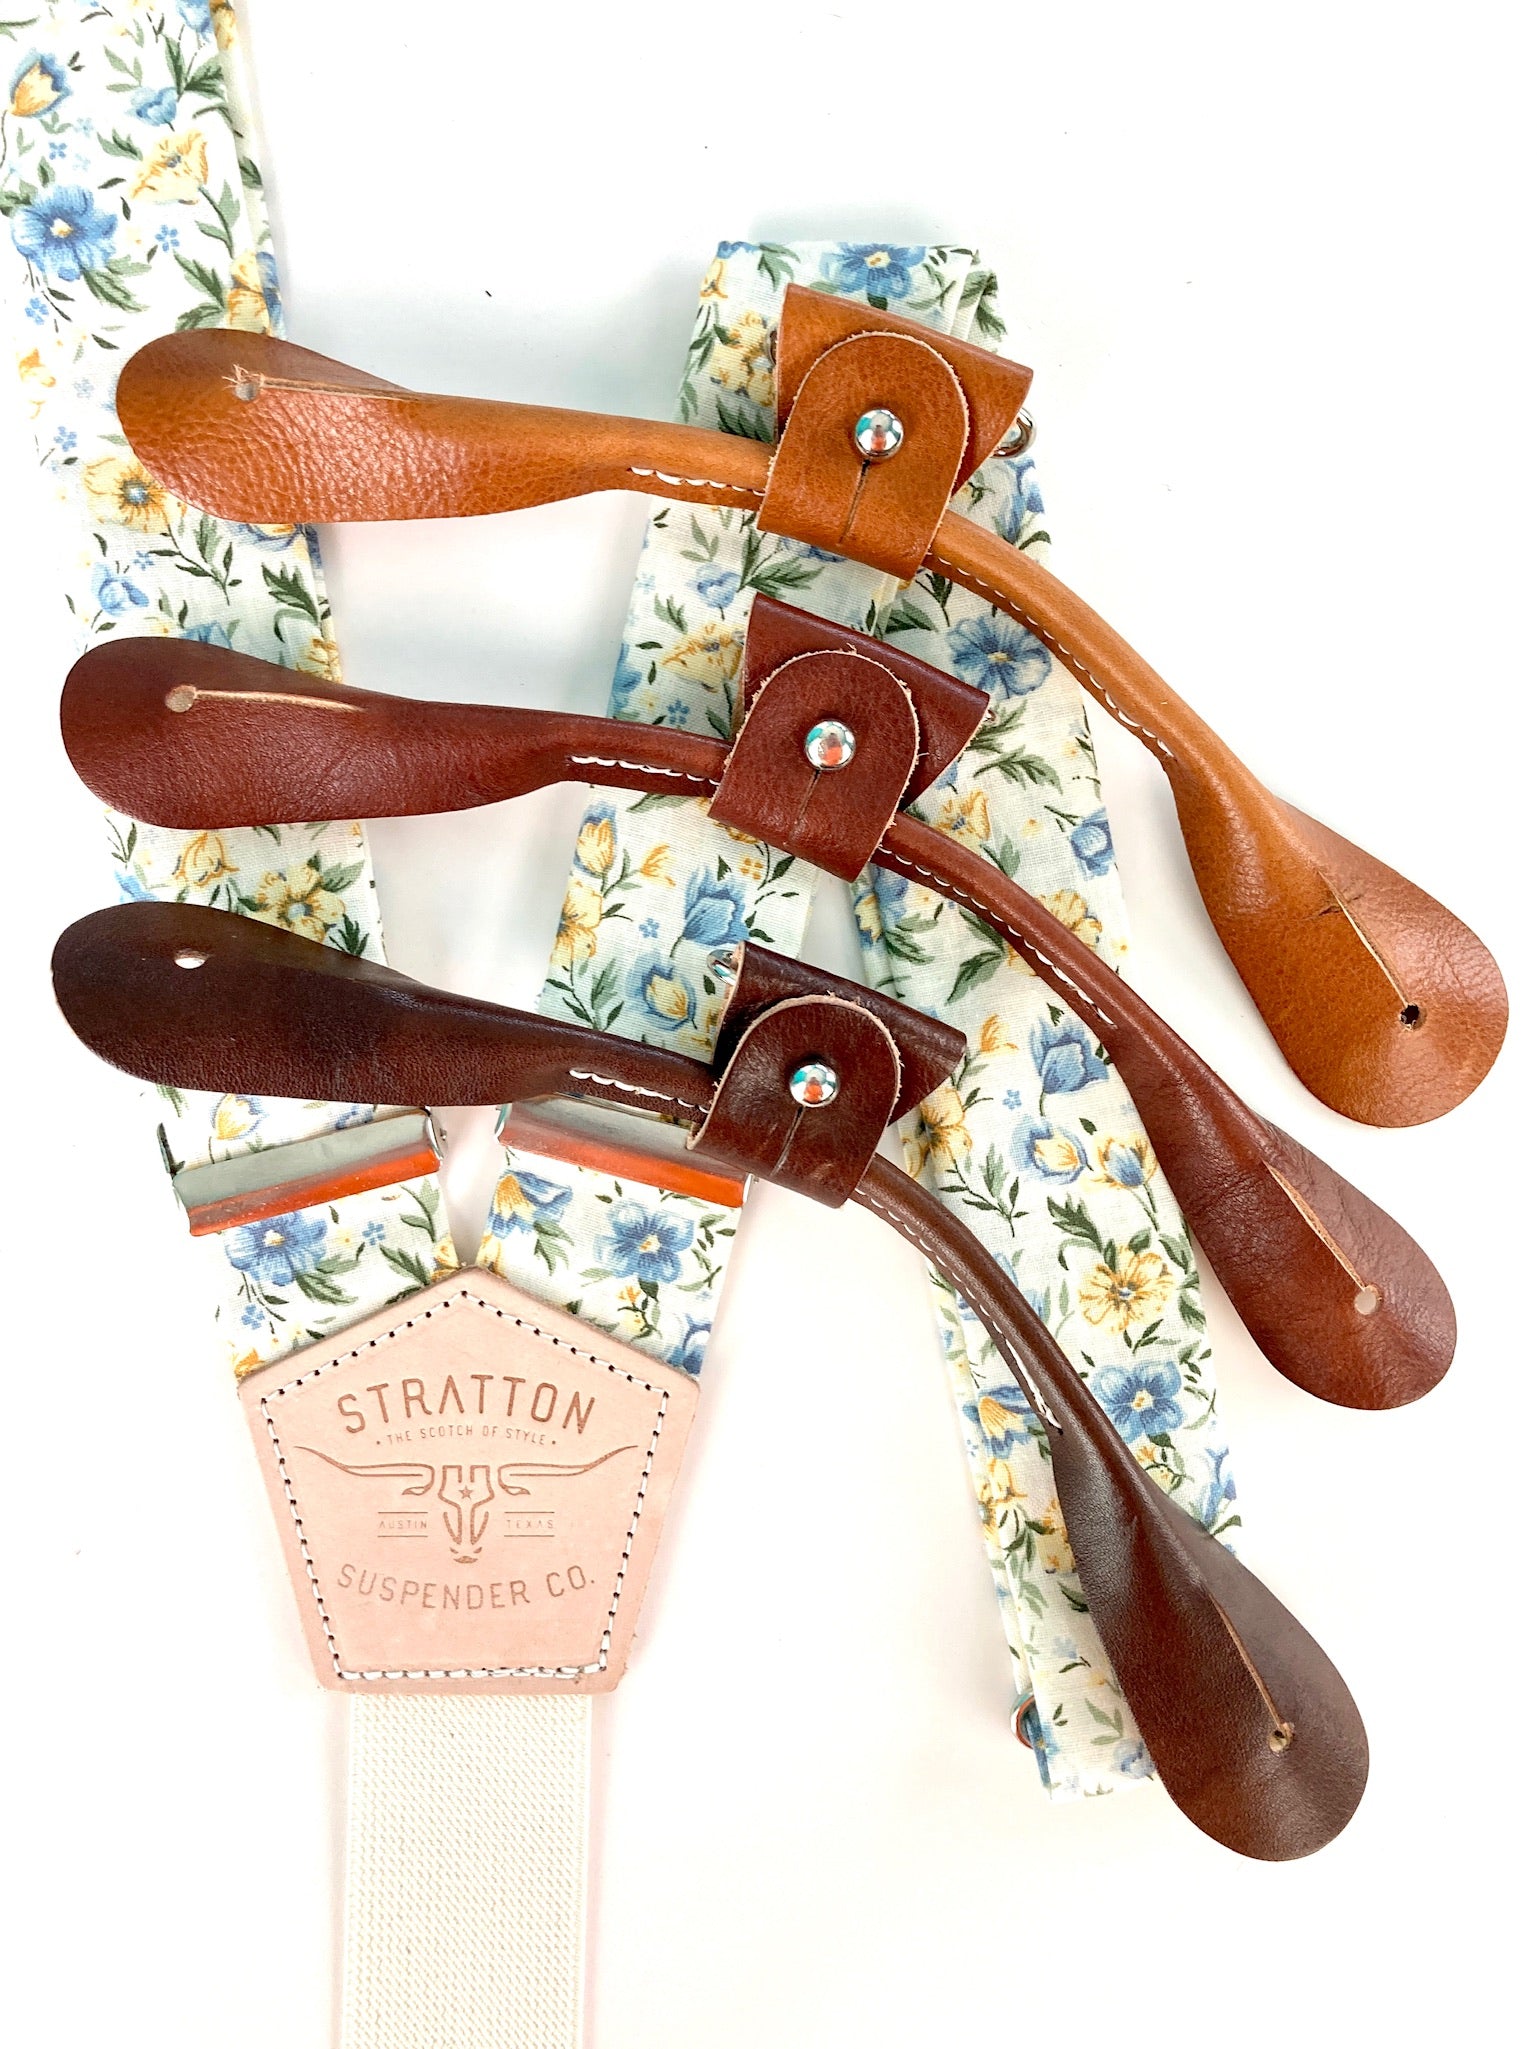 Stratton Suspender Co. Button On Set in Cream Vintage 1880 featuring Tan, Cognac, and Chocolate Italian Pontedero Leather